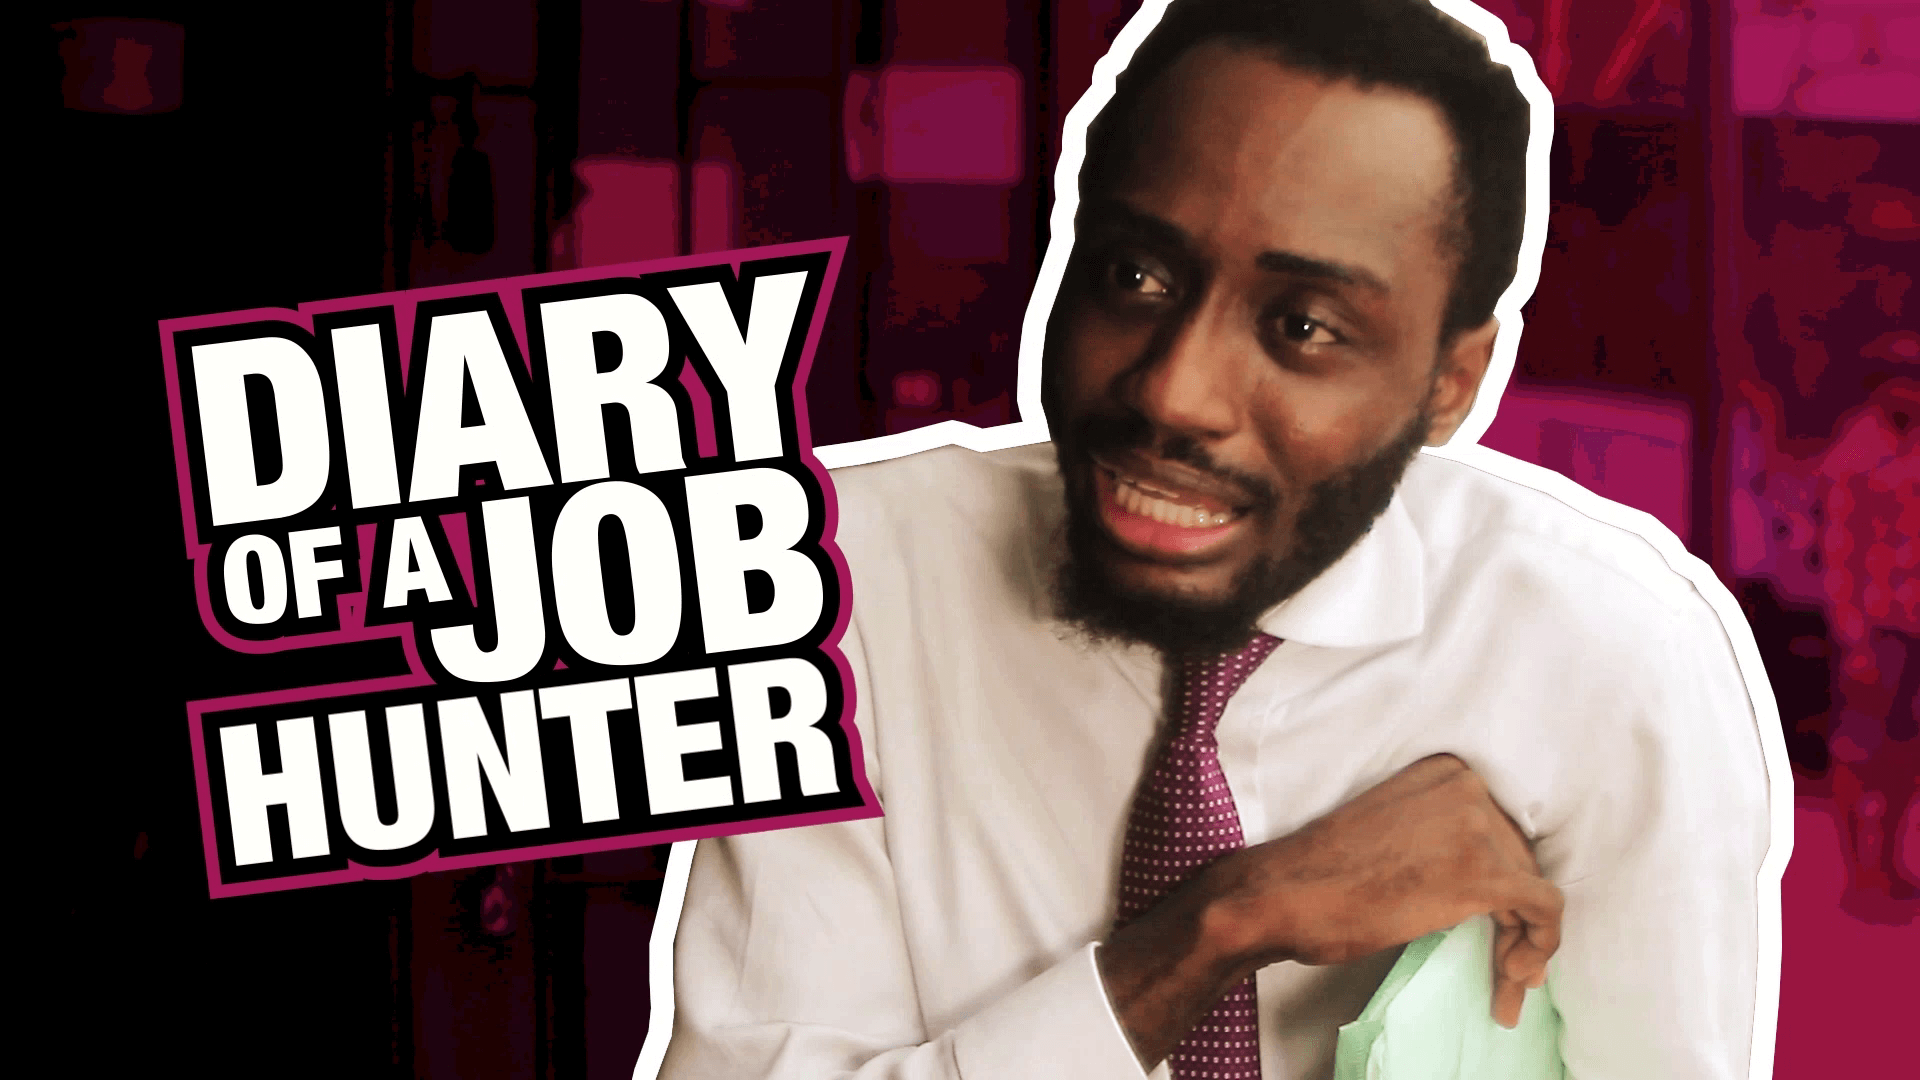 Watch the trailer: Diary of a Job Hunter